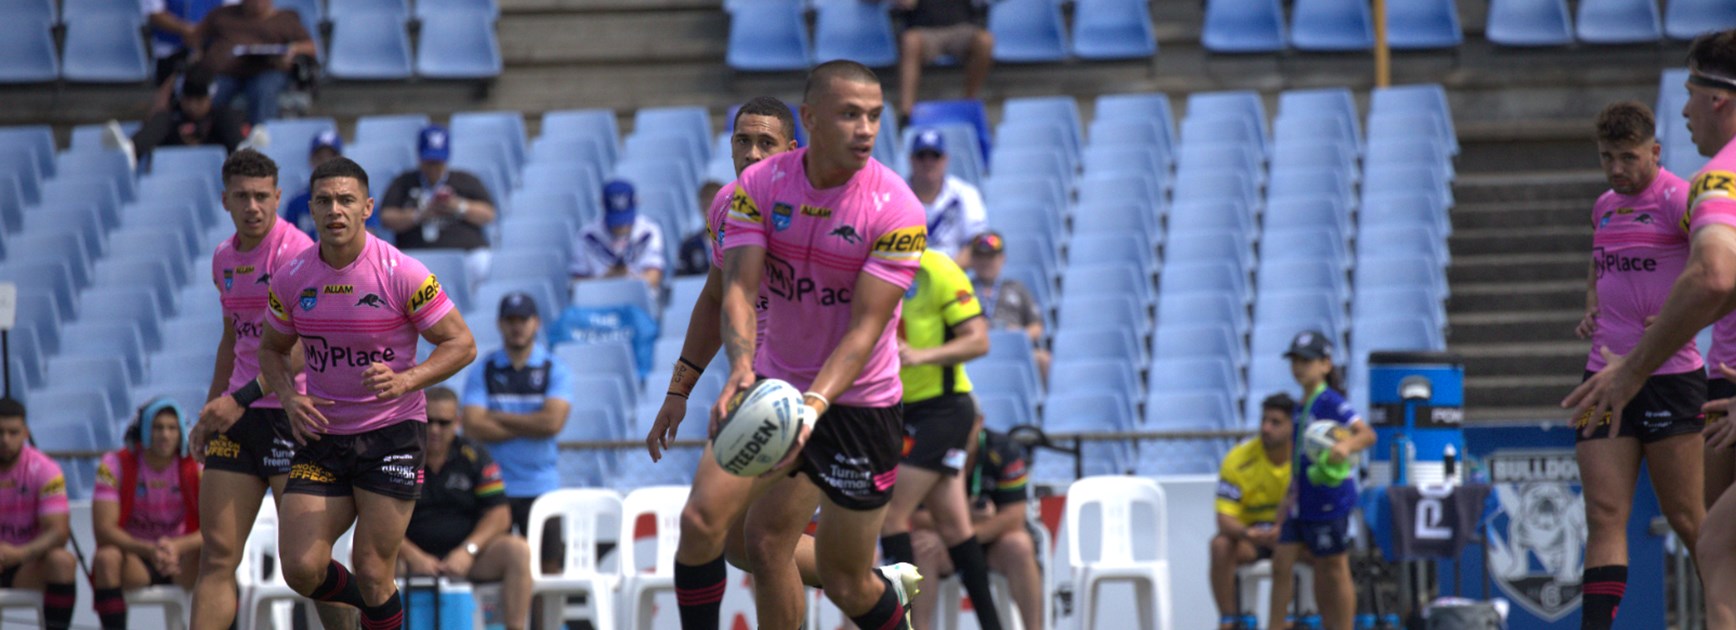 Understrength Panthers outclassed by Jets